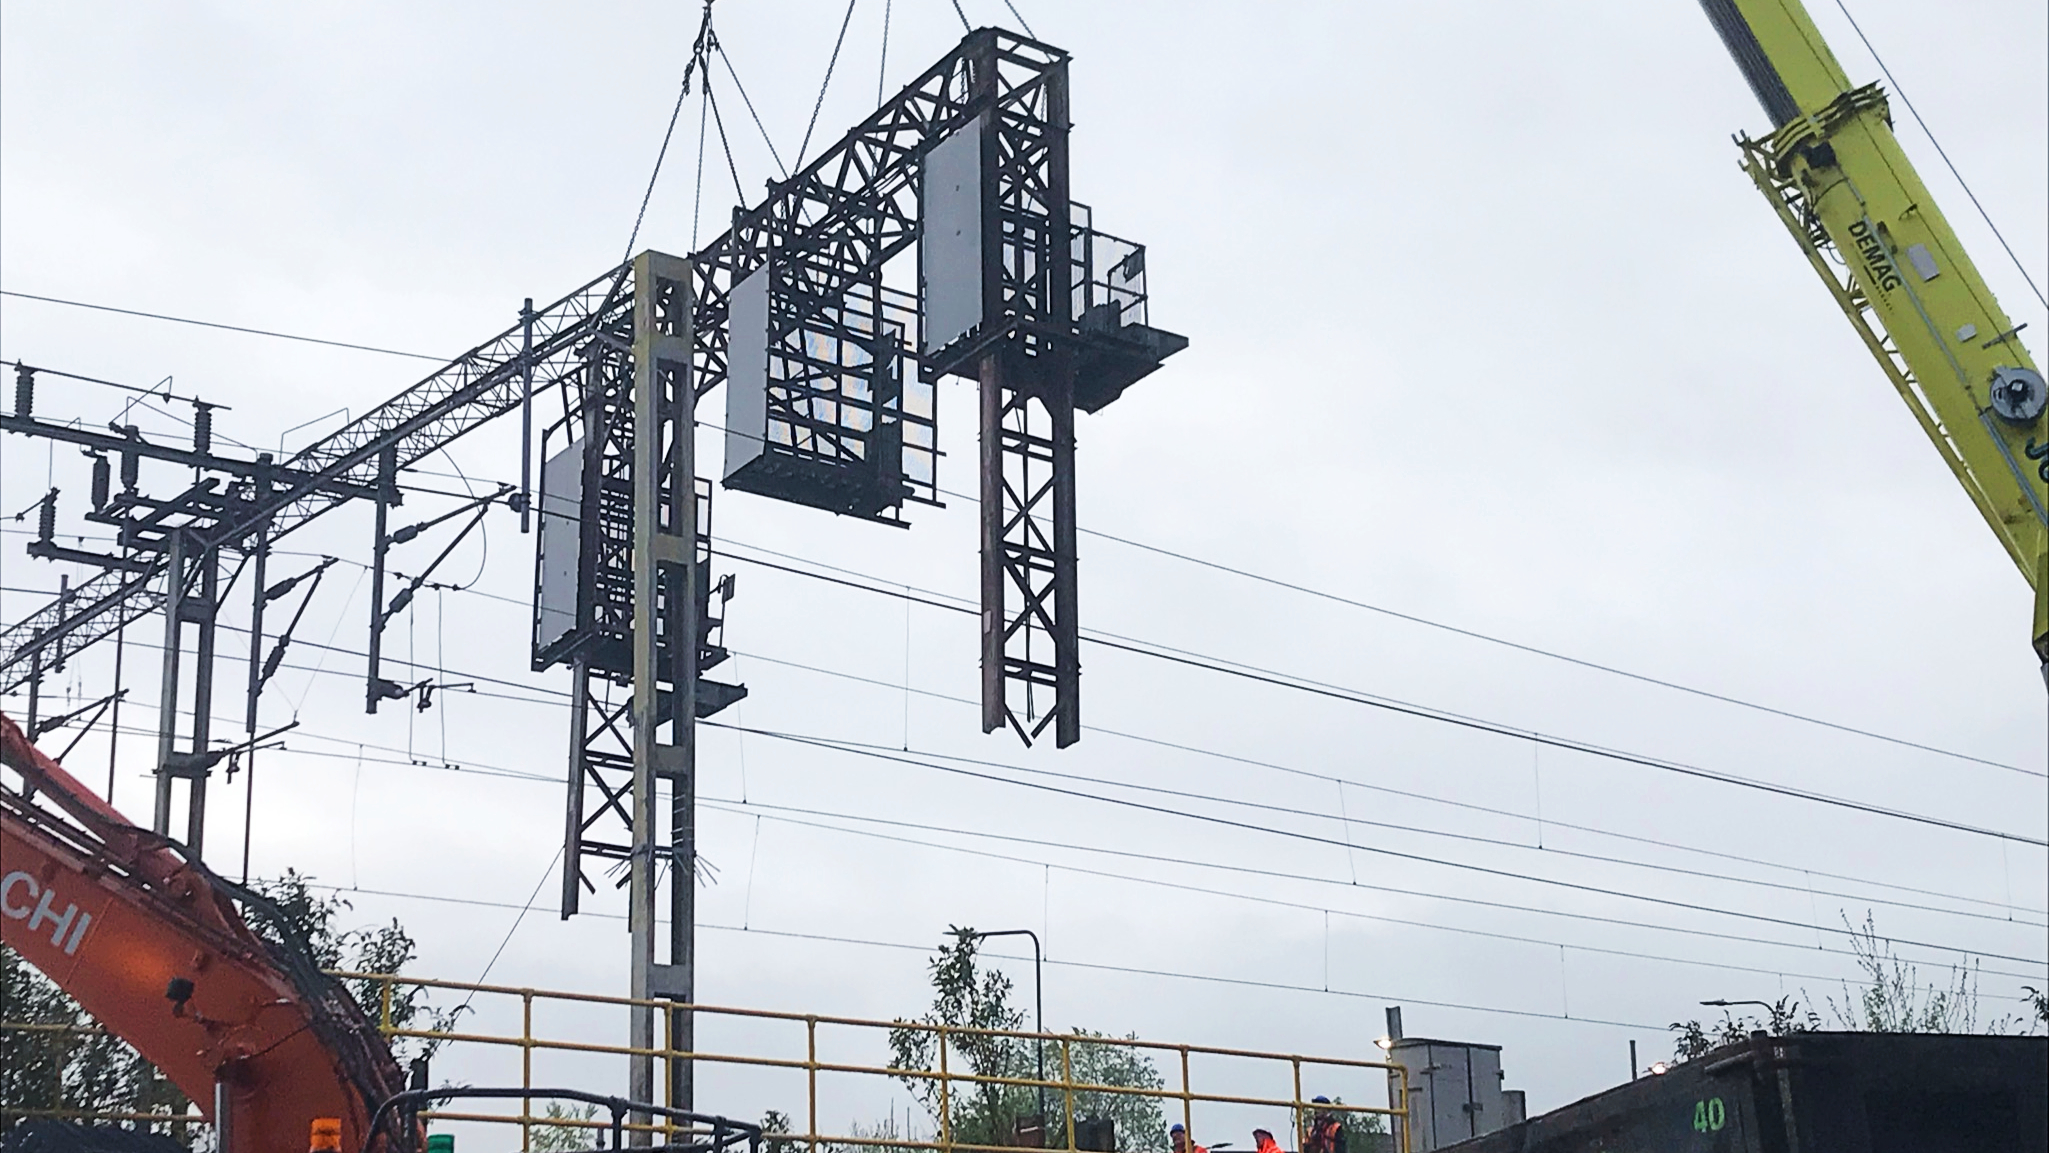 Old signalling gantry being lifted out by crane in Macclesfield.